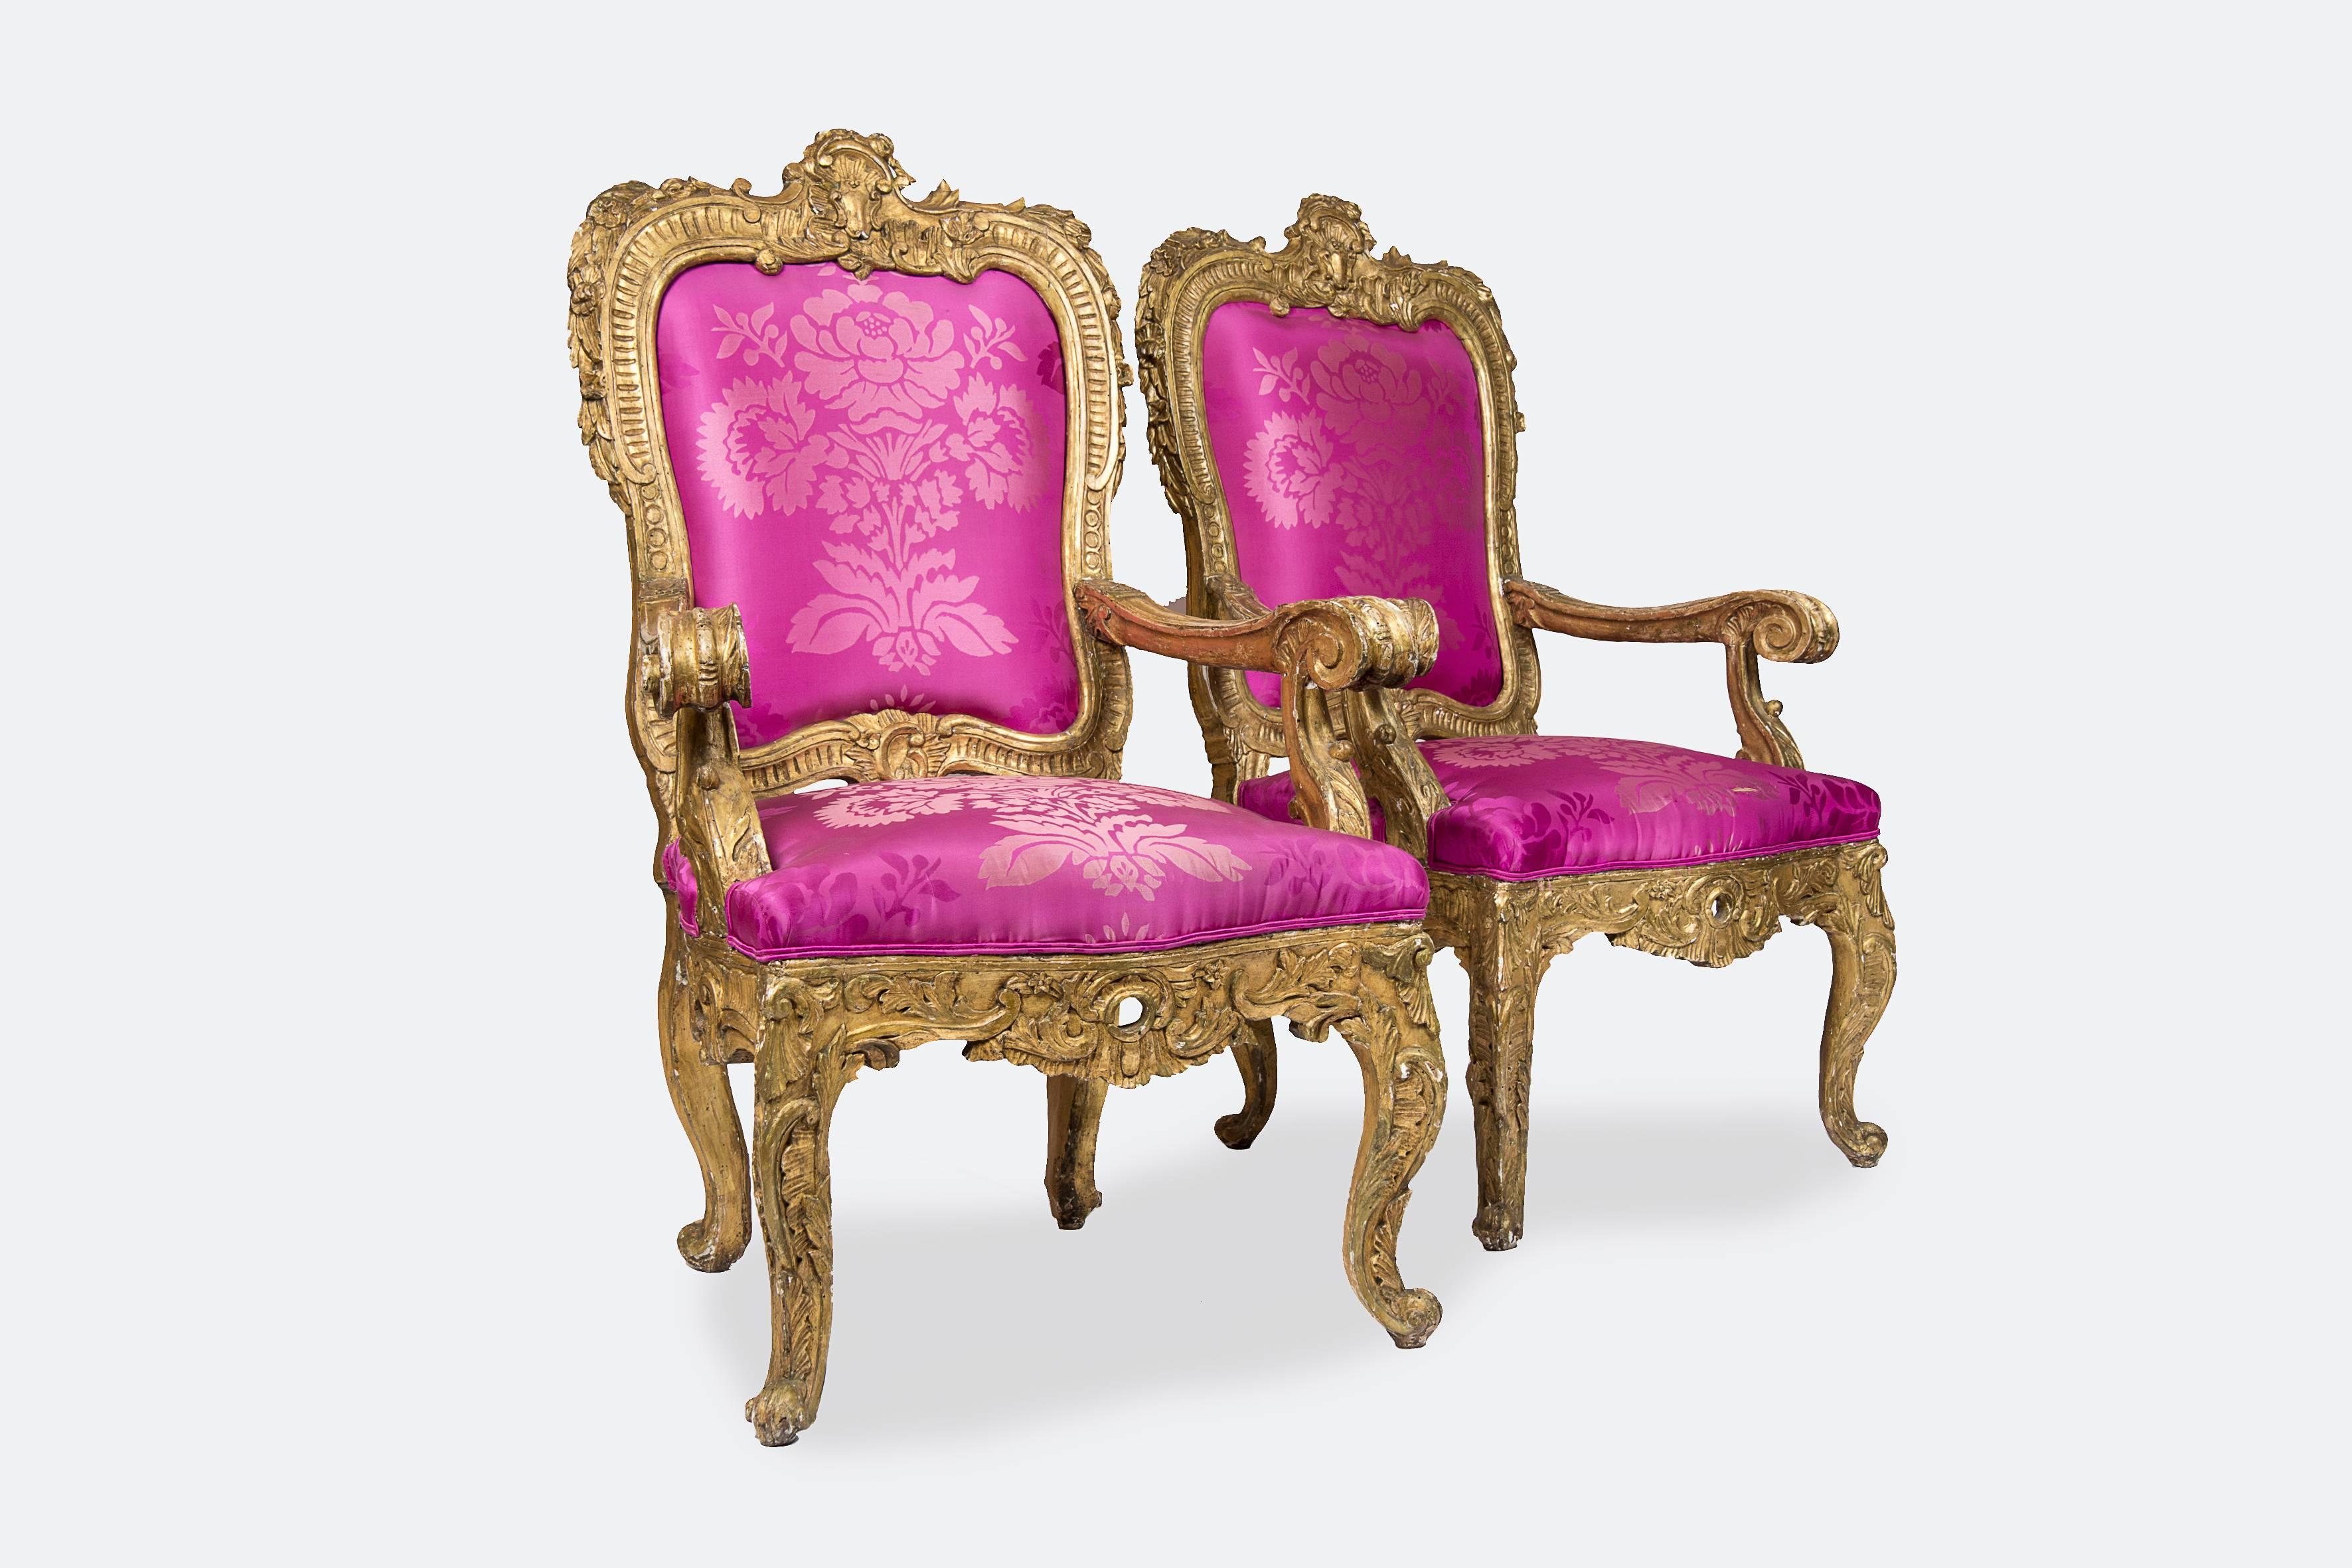 Pair of Italian giltwood Baroque "Royal" armchairs, upholstered with a fuchsia colored silky fabric.